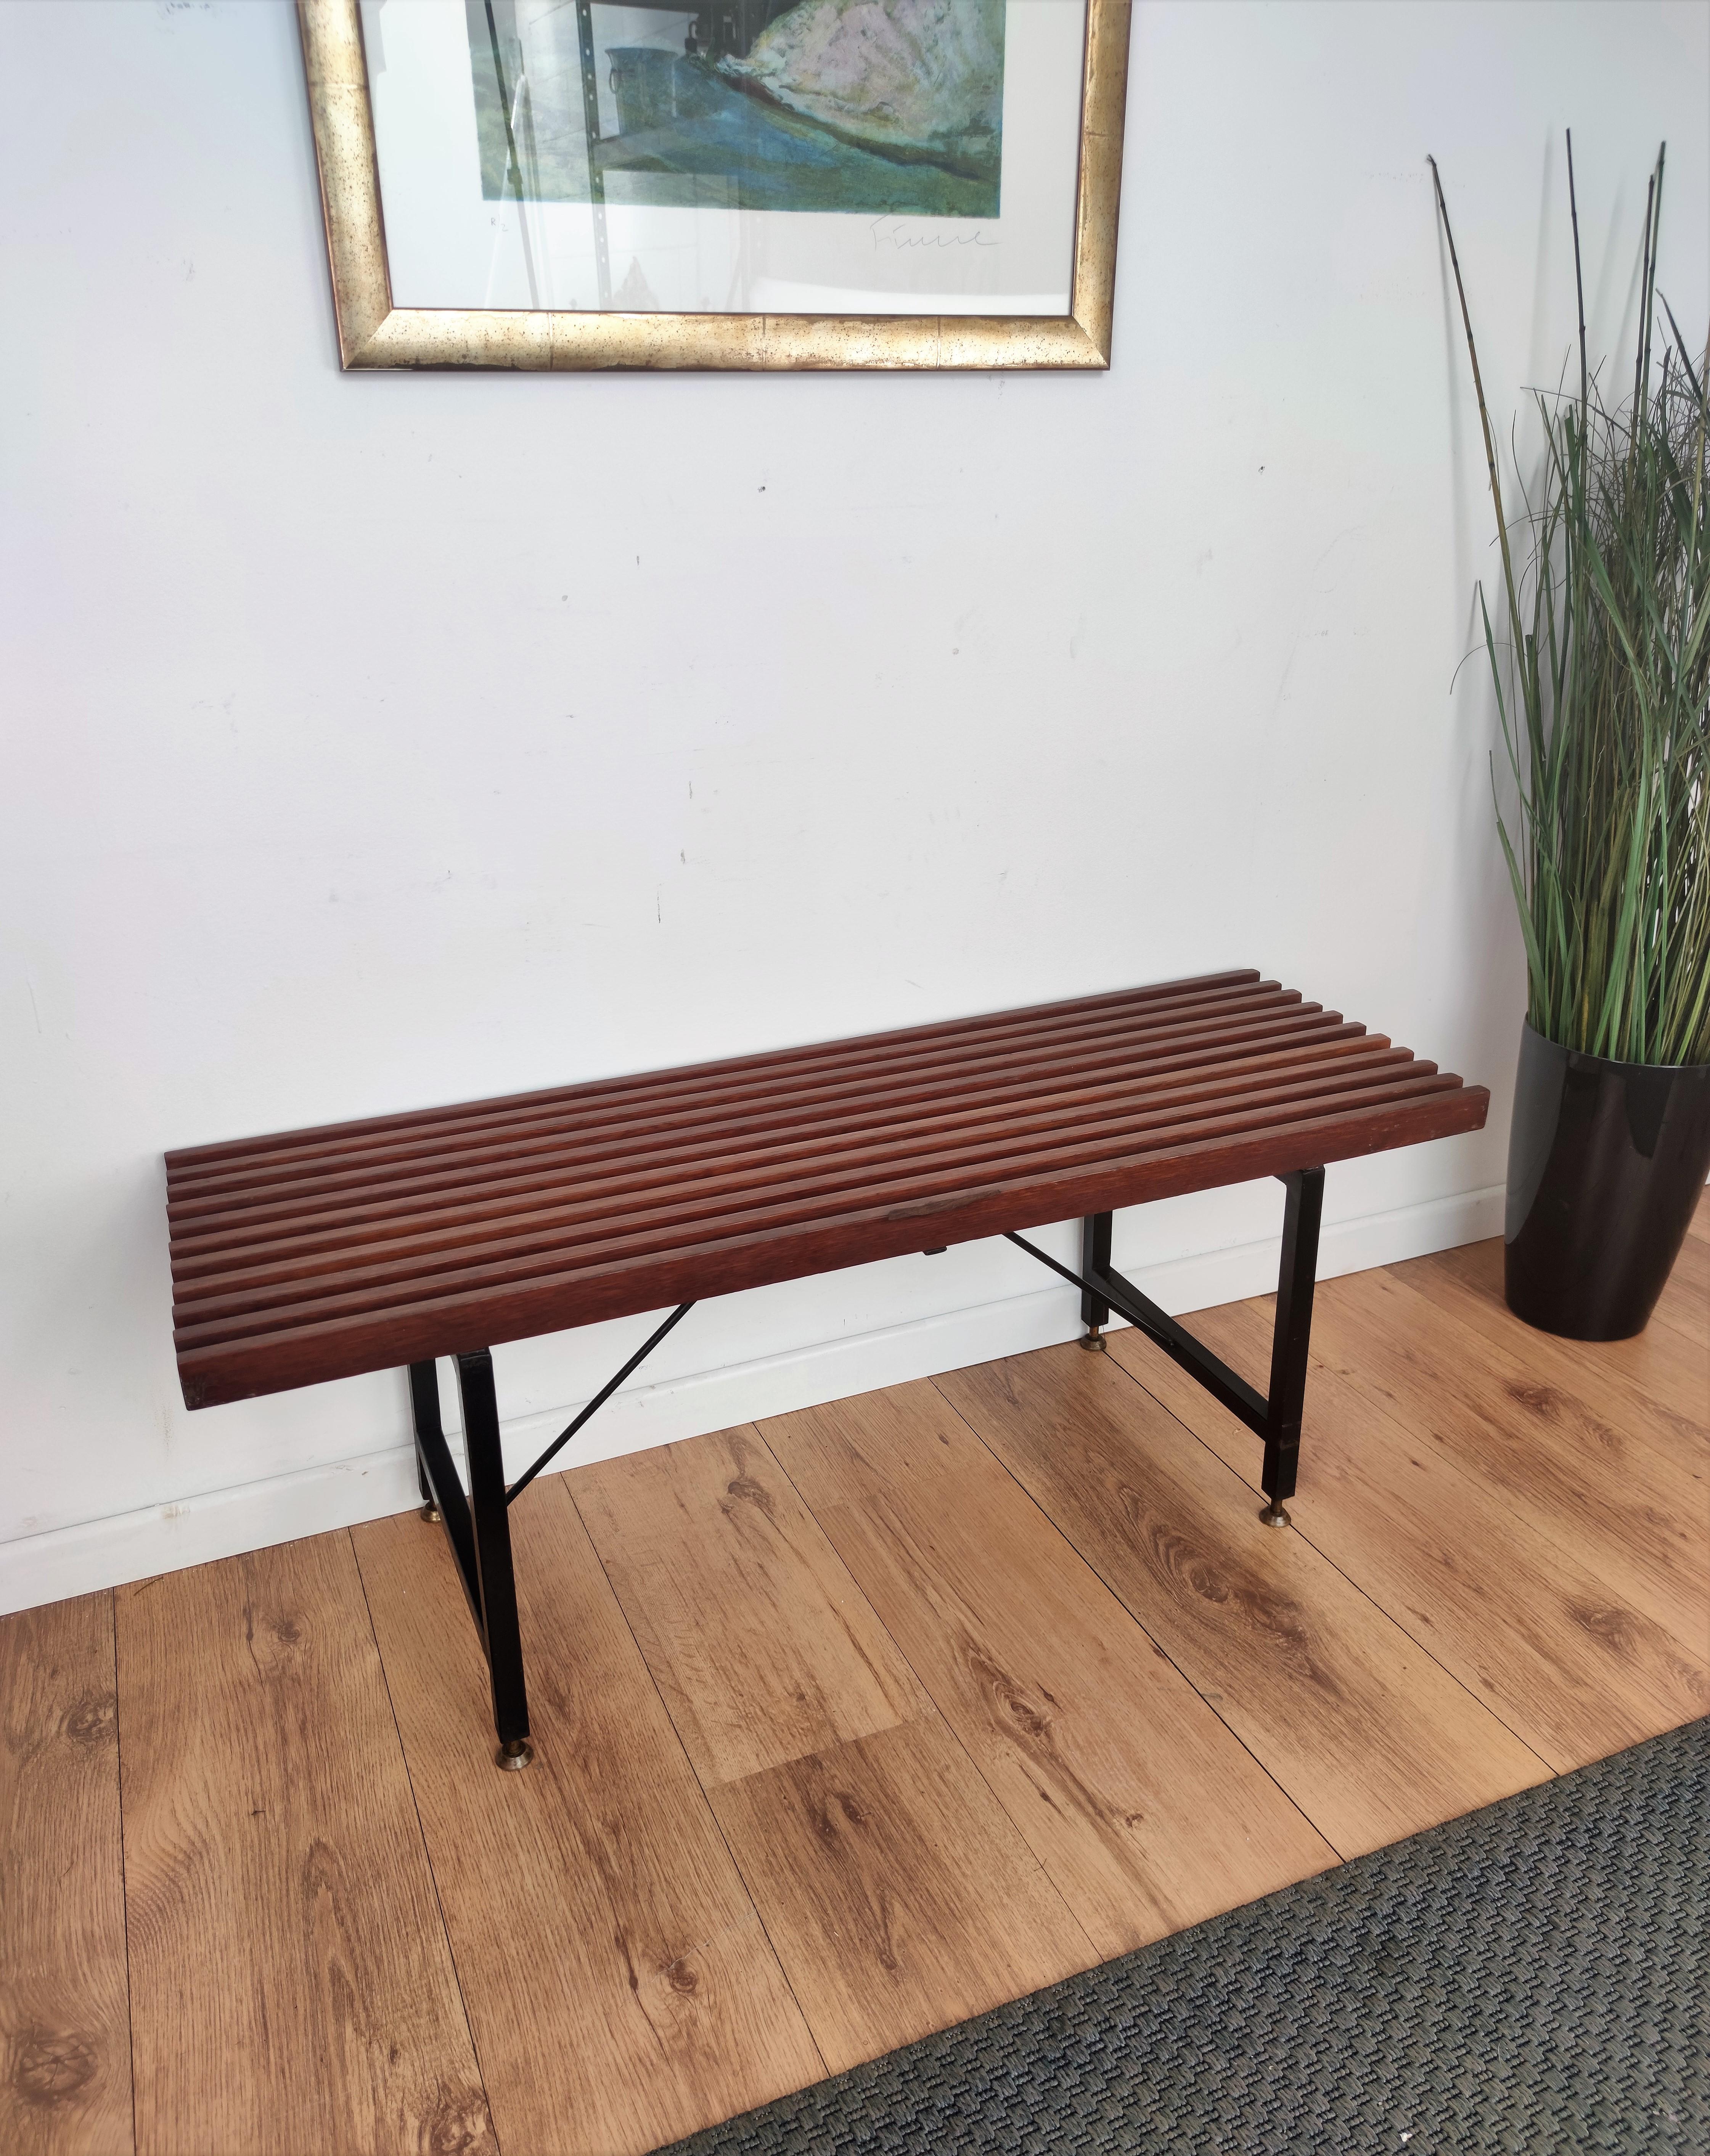 Italian Mid-Century Modern platform slat bench with wood slated top sitting on black metal cross bar base and nice brass foot-ends. The perfect piece for a house or building with large expansive windows or a long entrance way for seating or can be